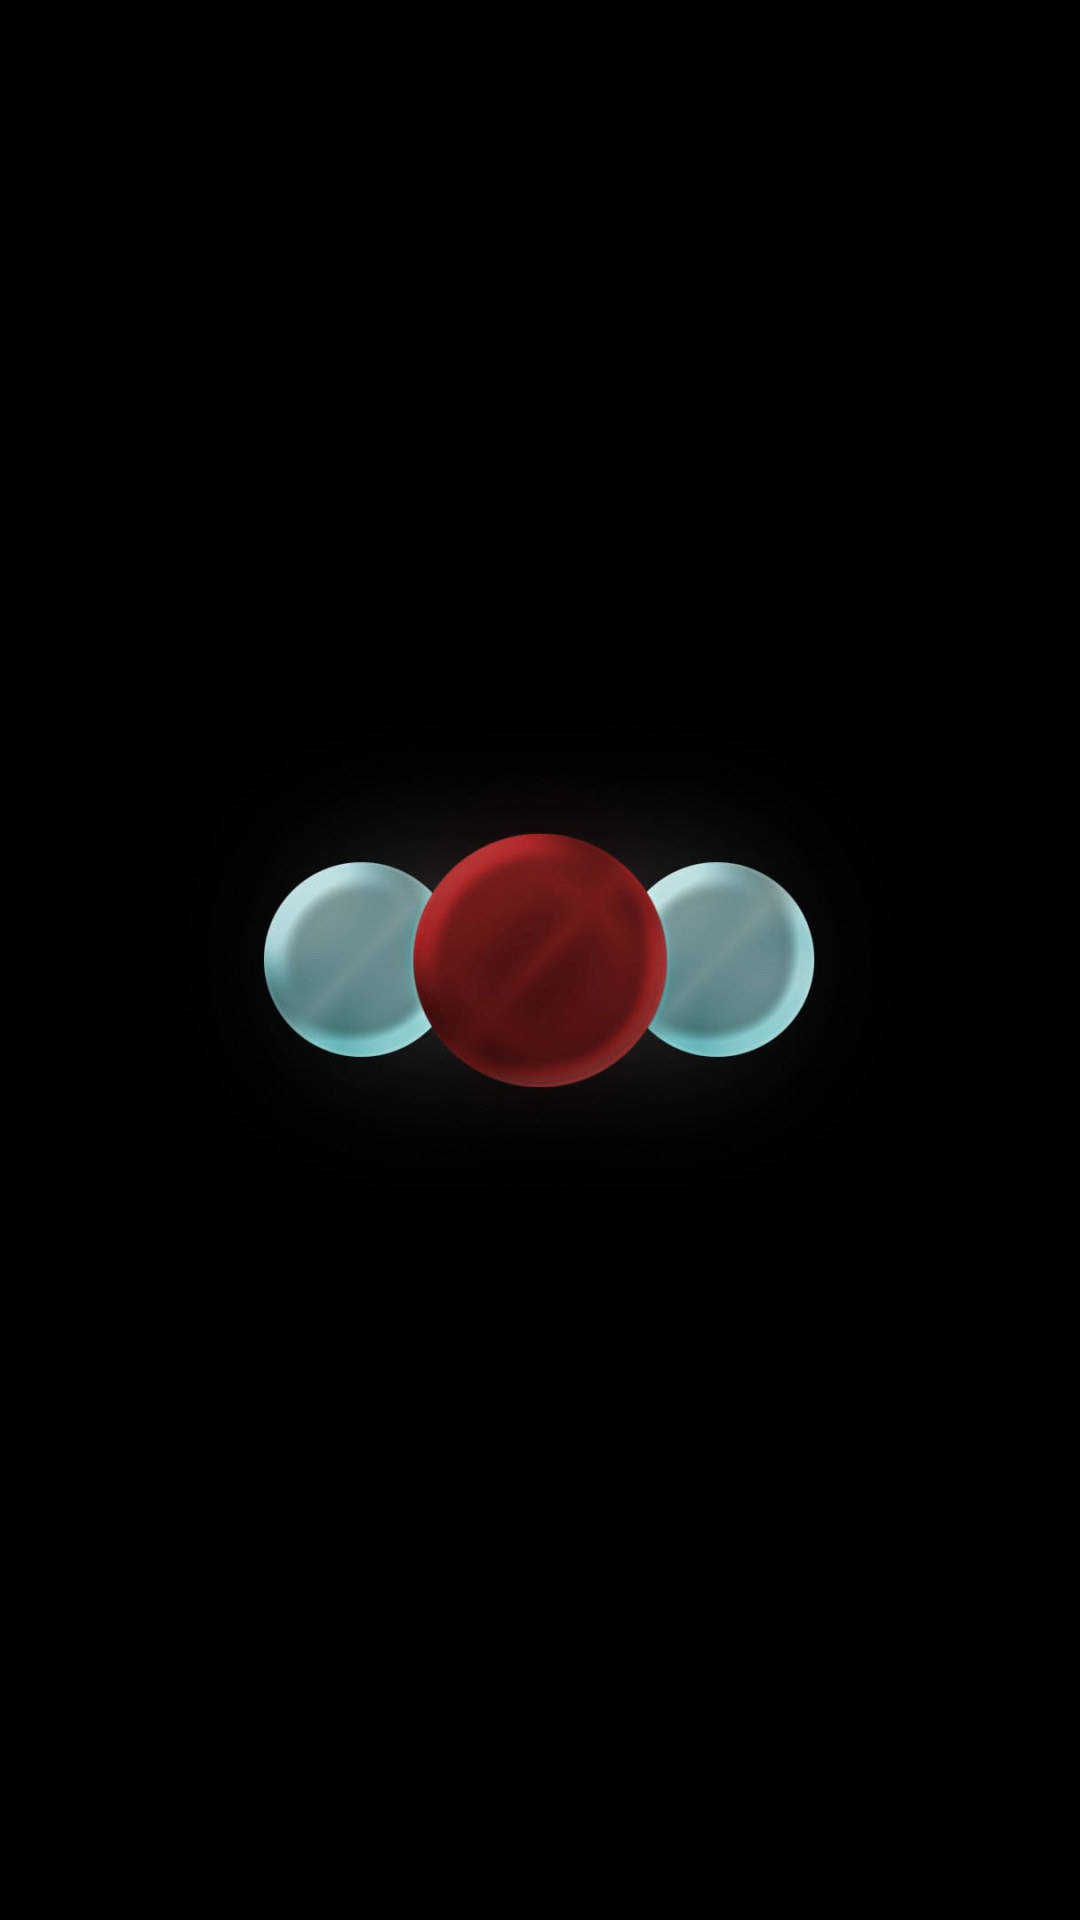 Red Circle With Two Grey Circles Background